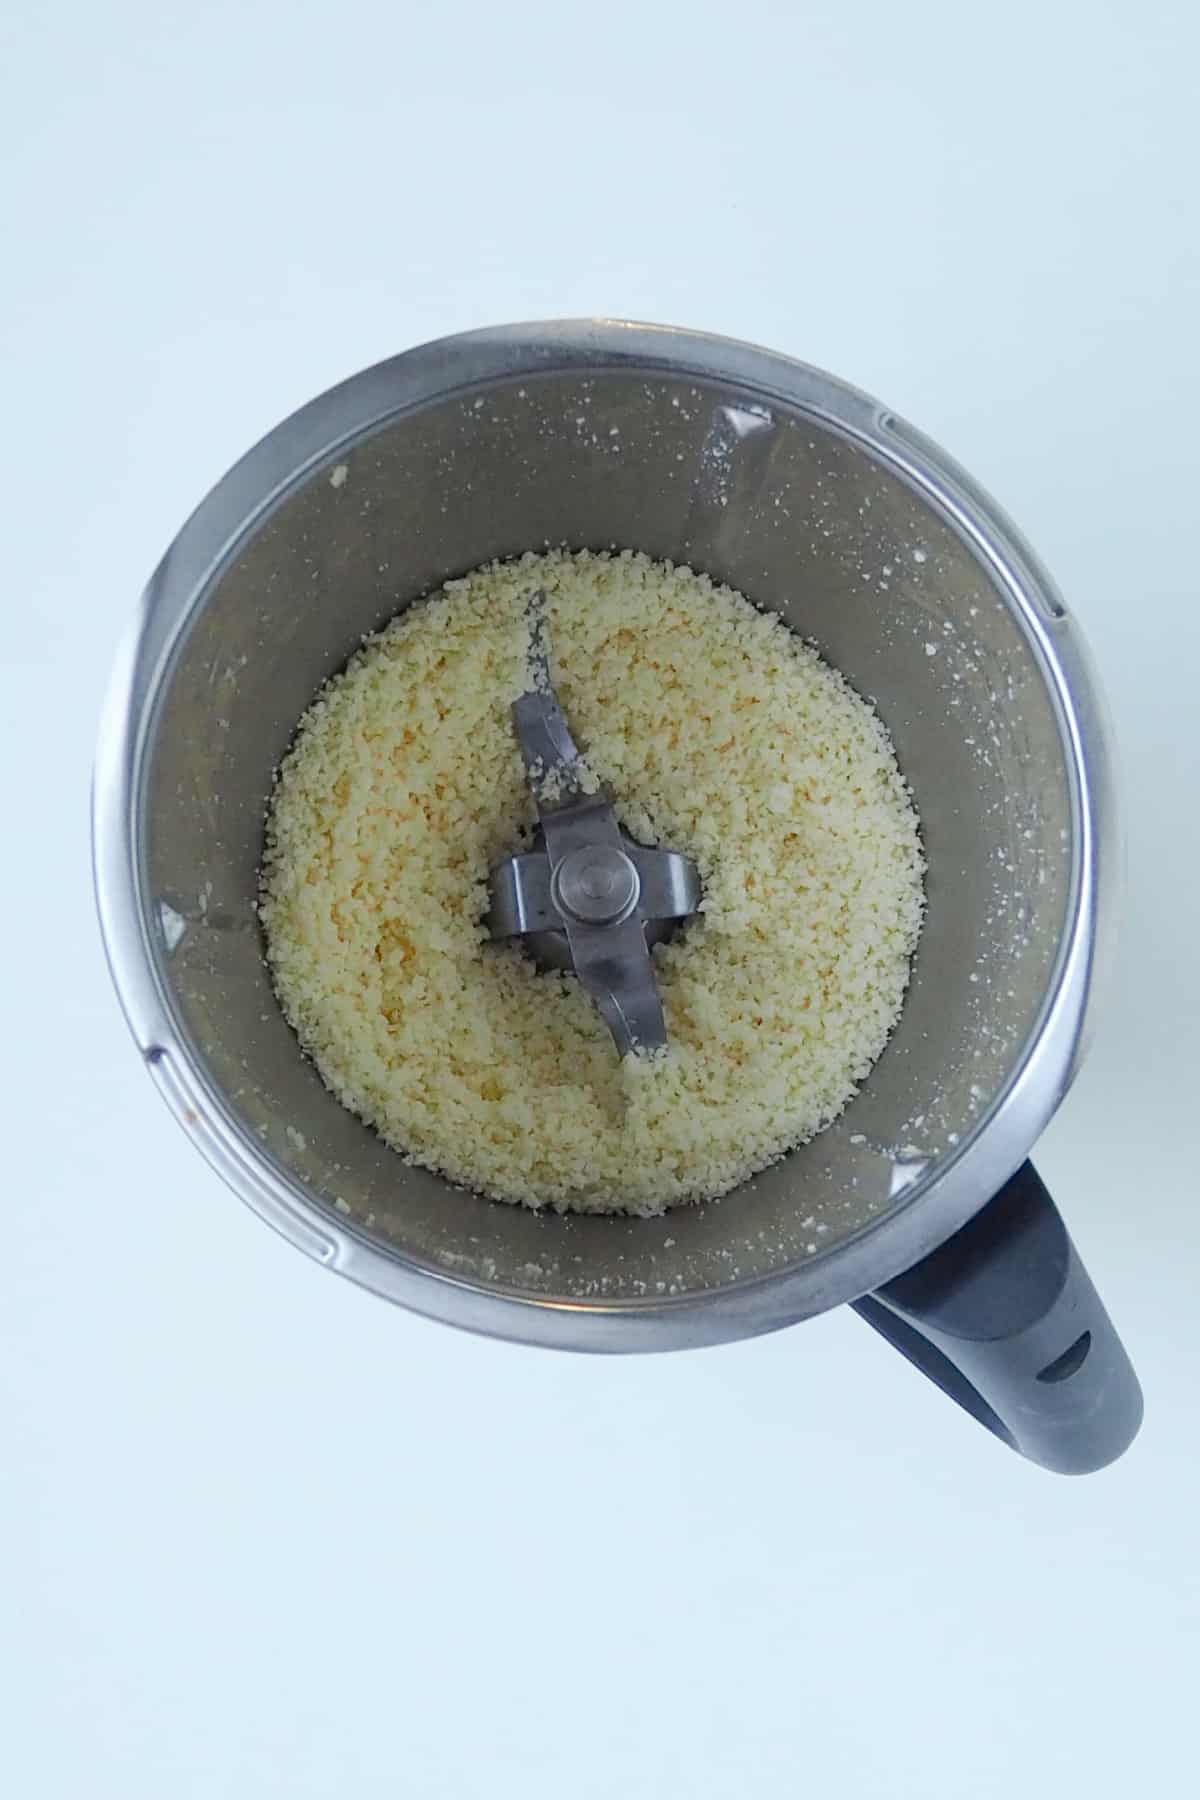 Grated cheese in a thermomix bowl.